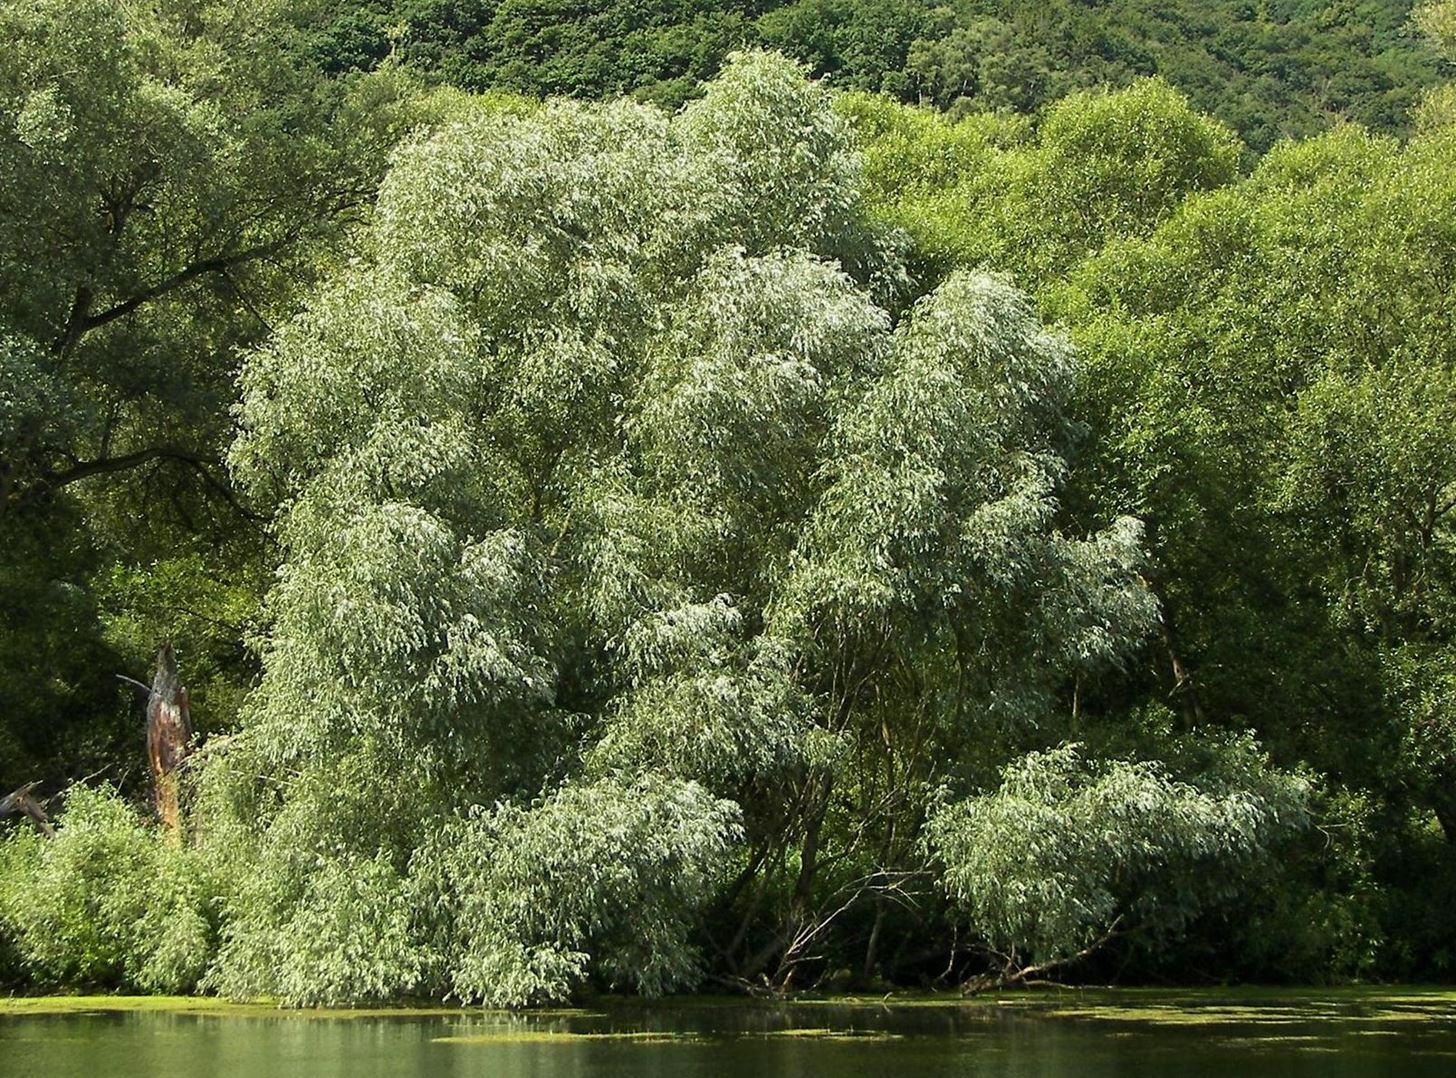 How to Make Aspirin from a Willow Tree